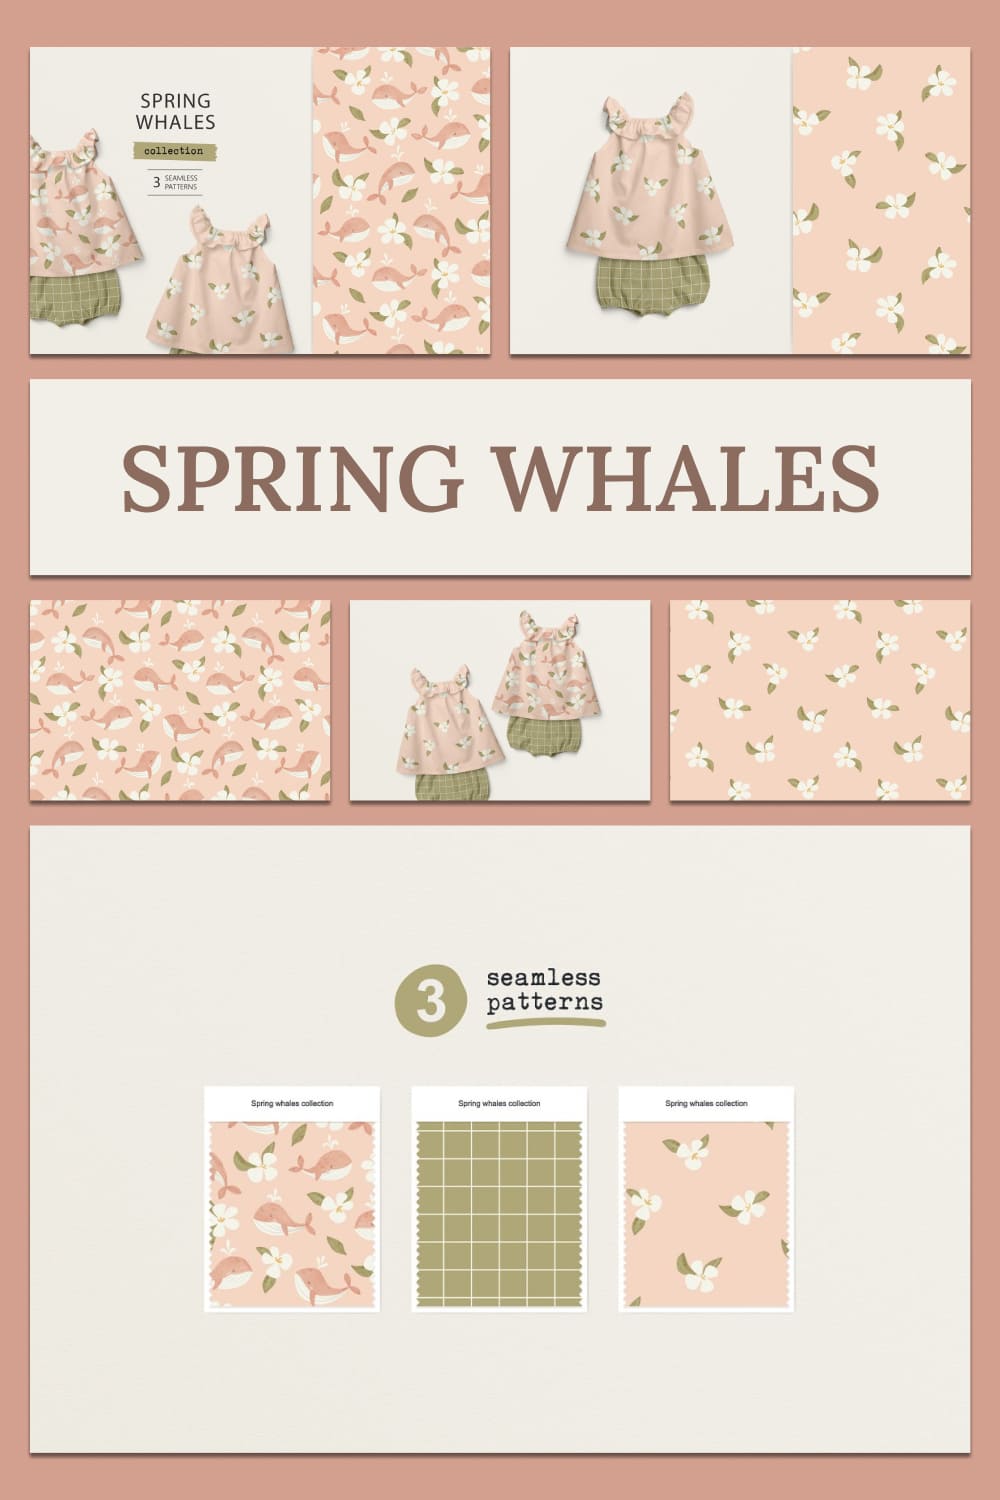 spring whales patterns.